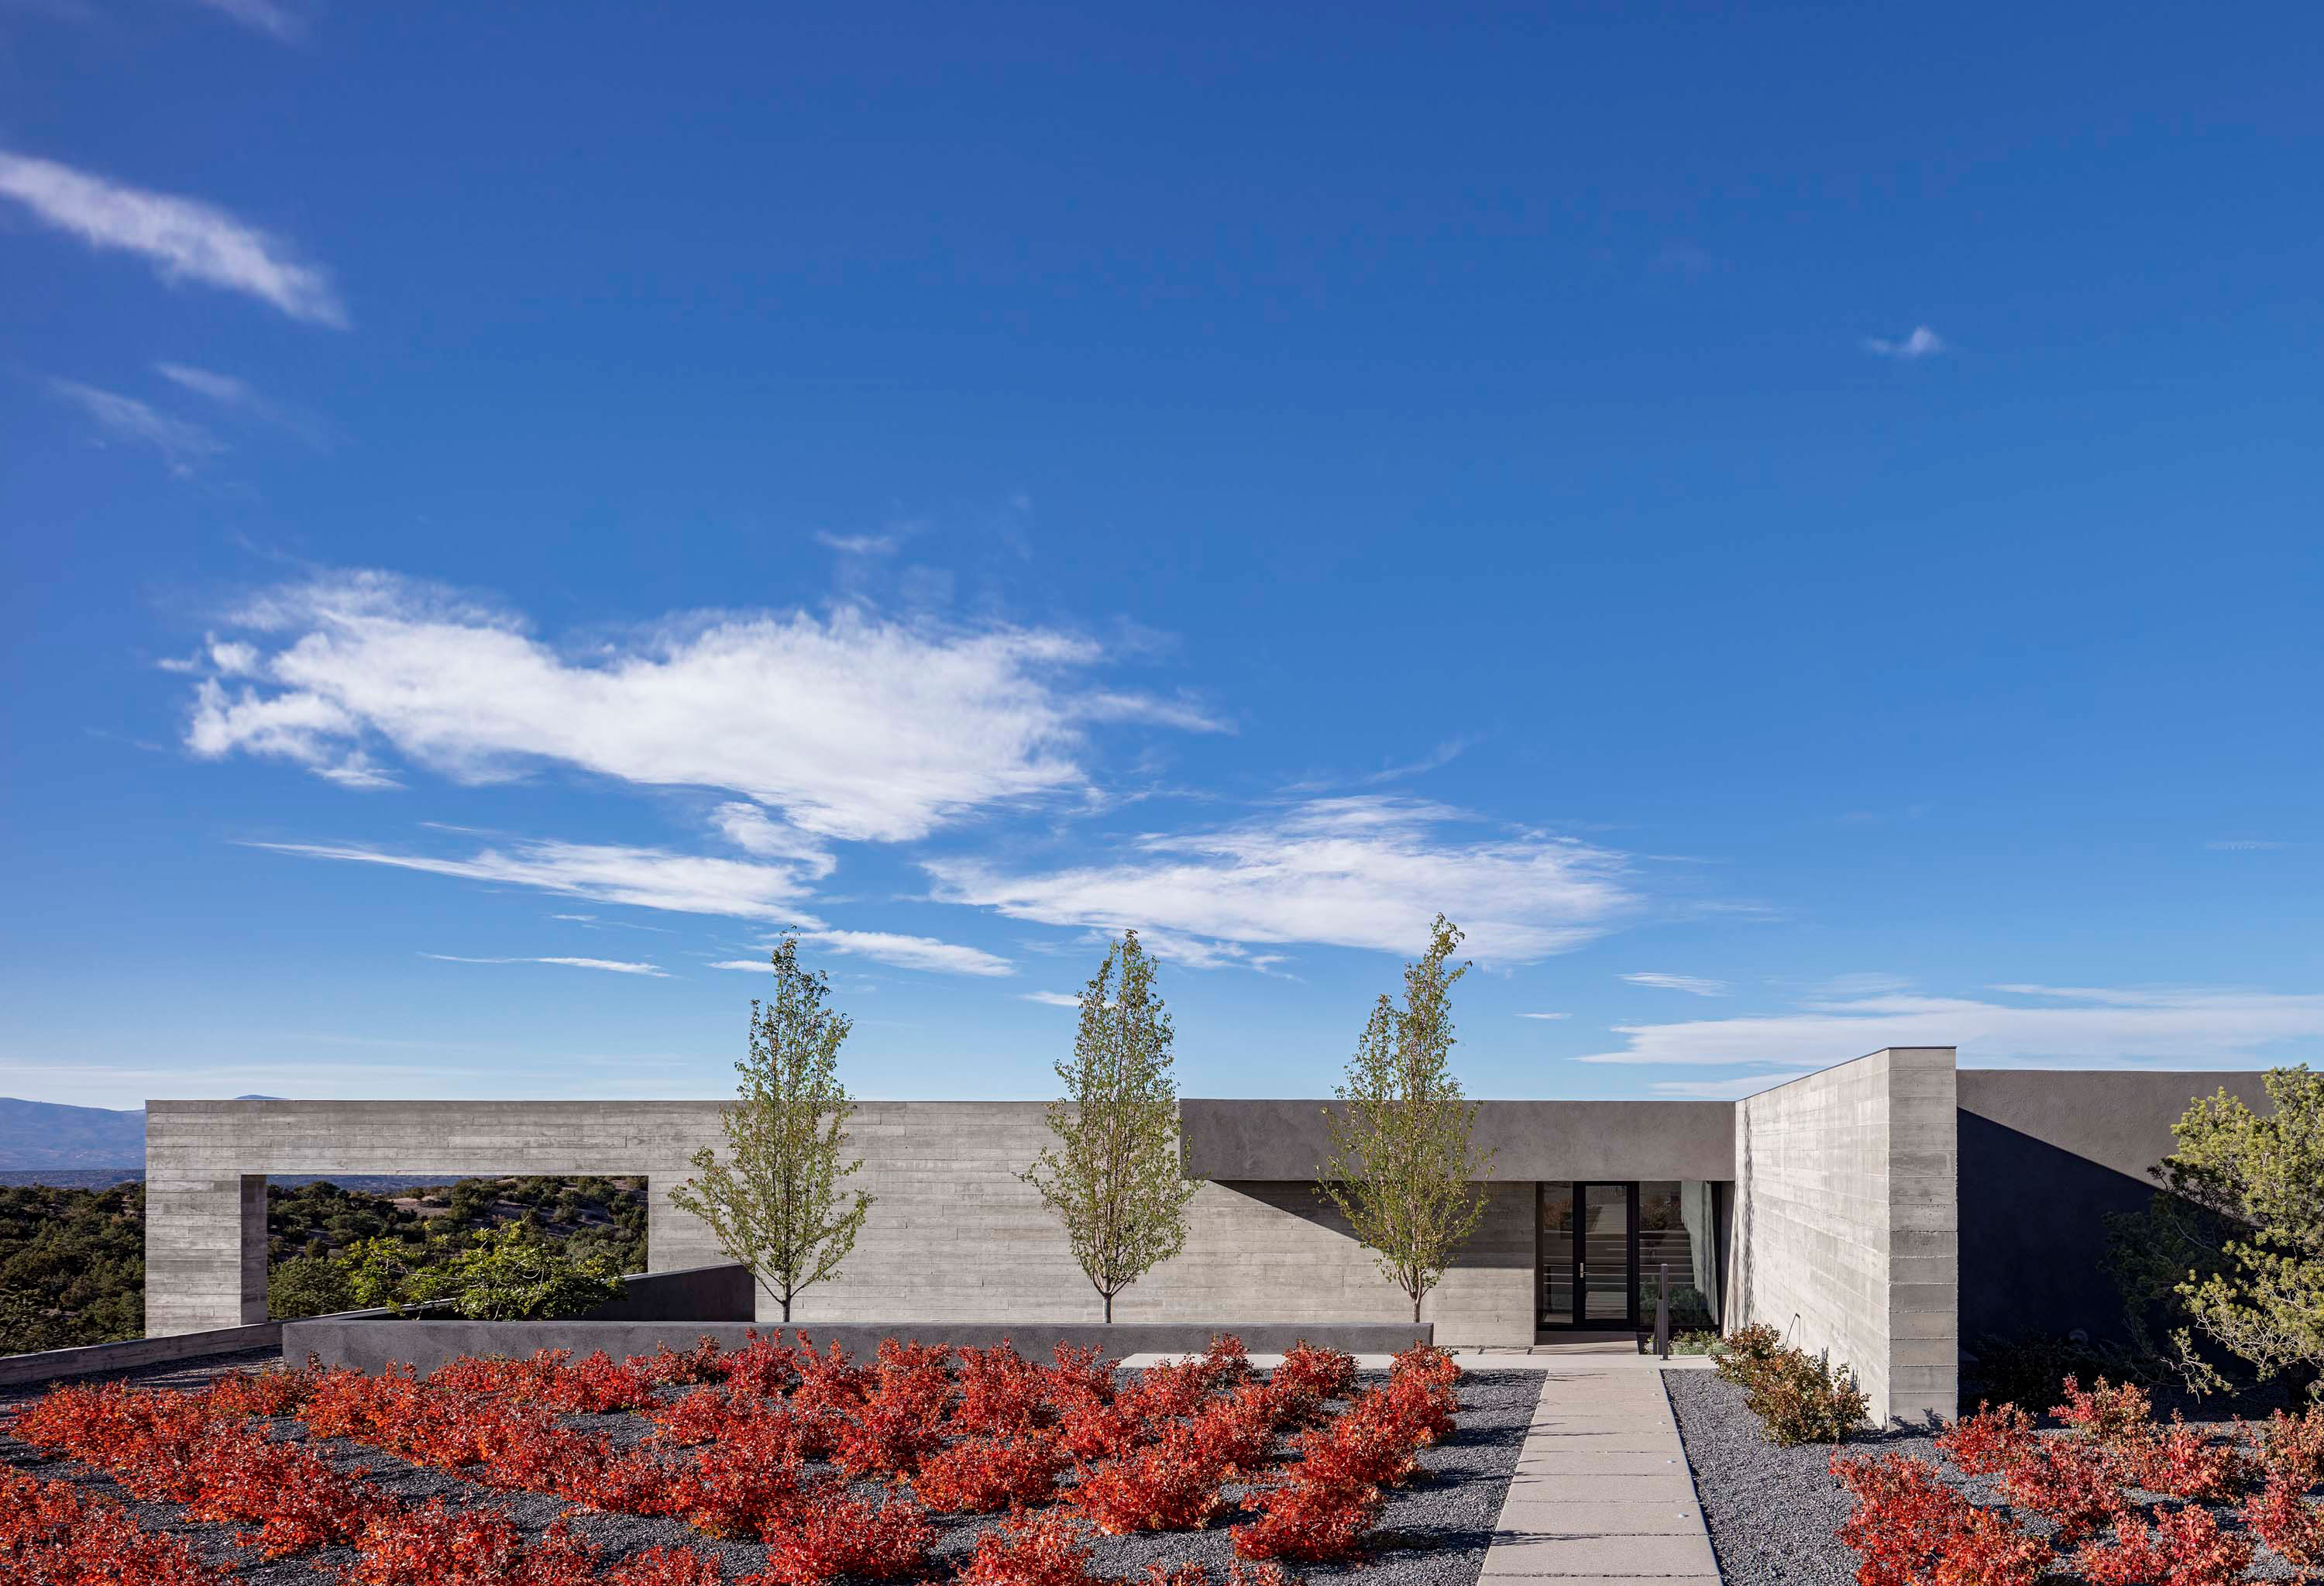 Exterior photo of the Sangre de Cristo House by Specht Novak Architects. Shot by Casey Dunn, featuring a welcoming entryway to the concrete home and its surrounding garden.